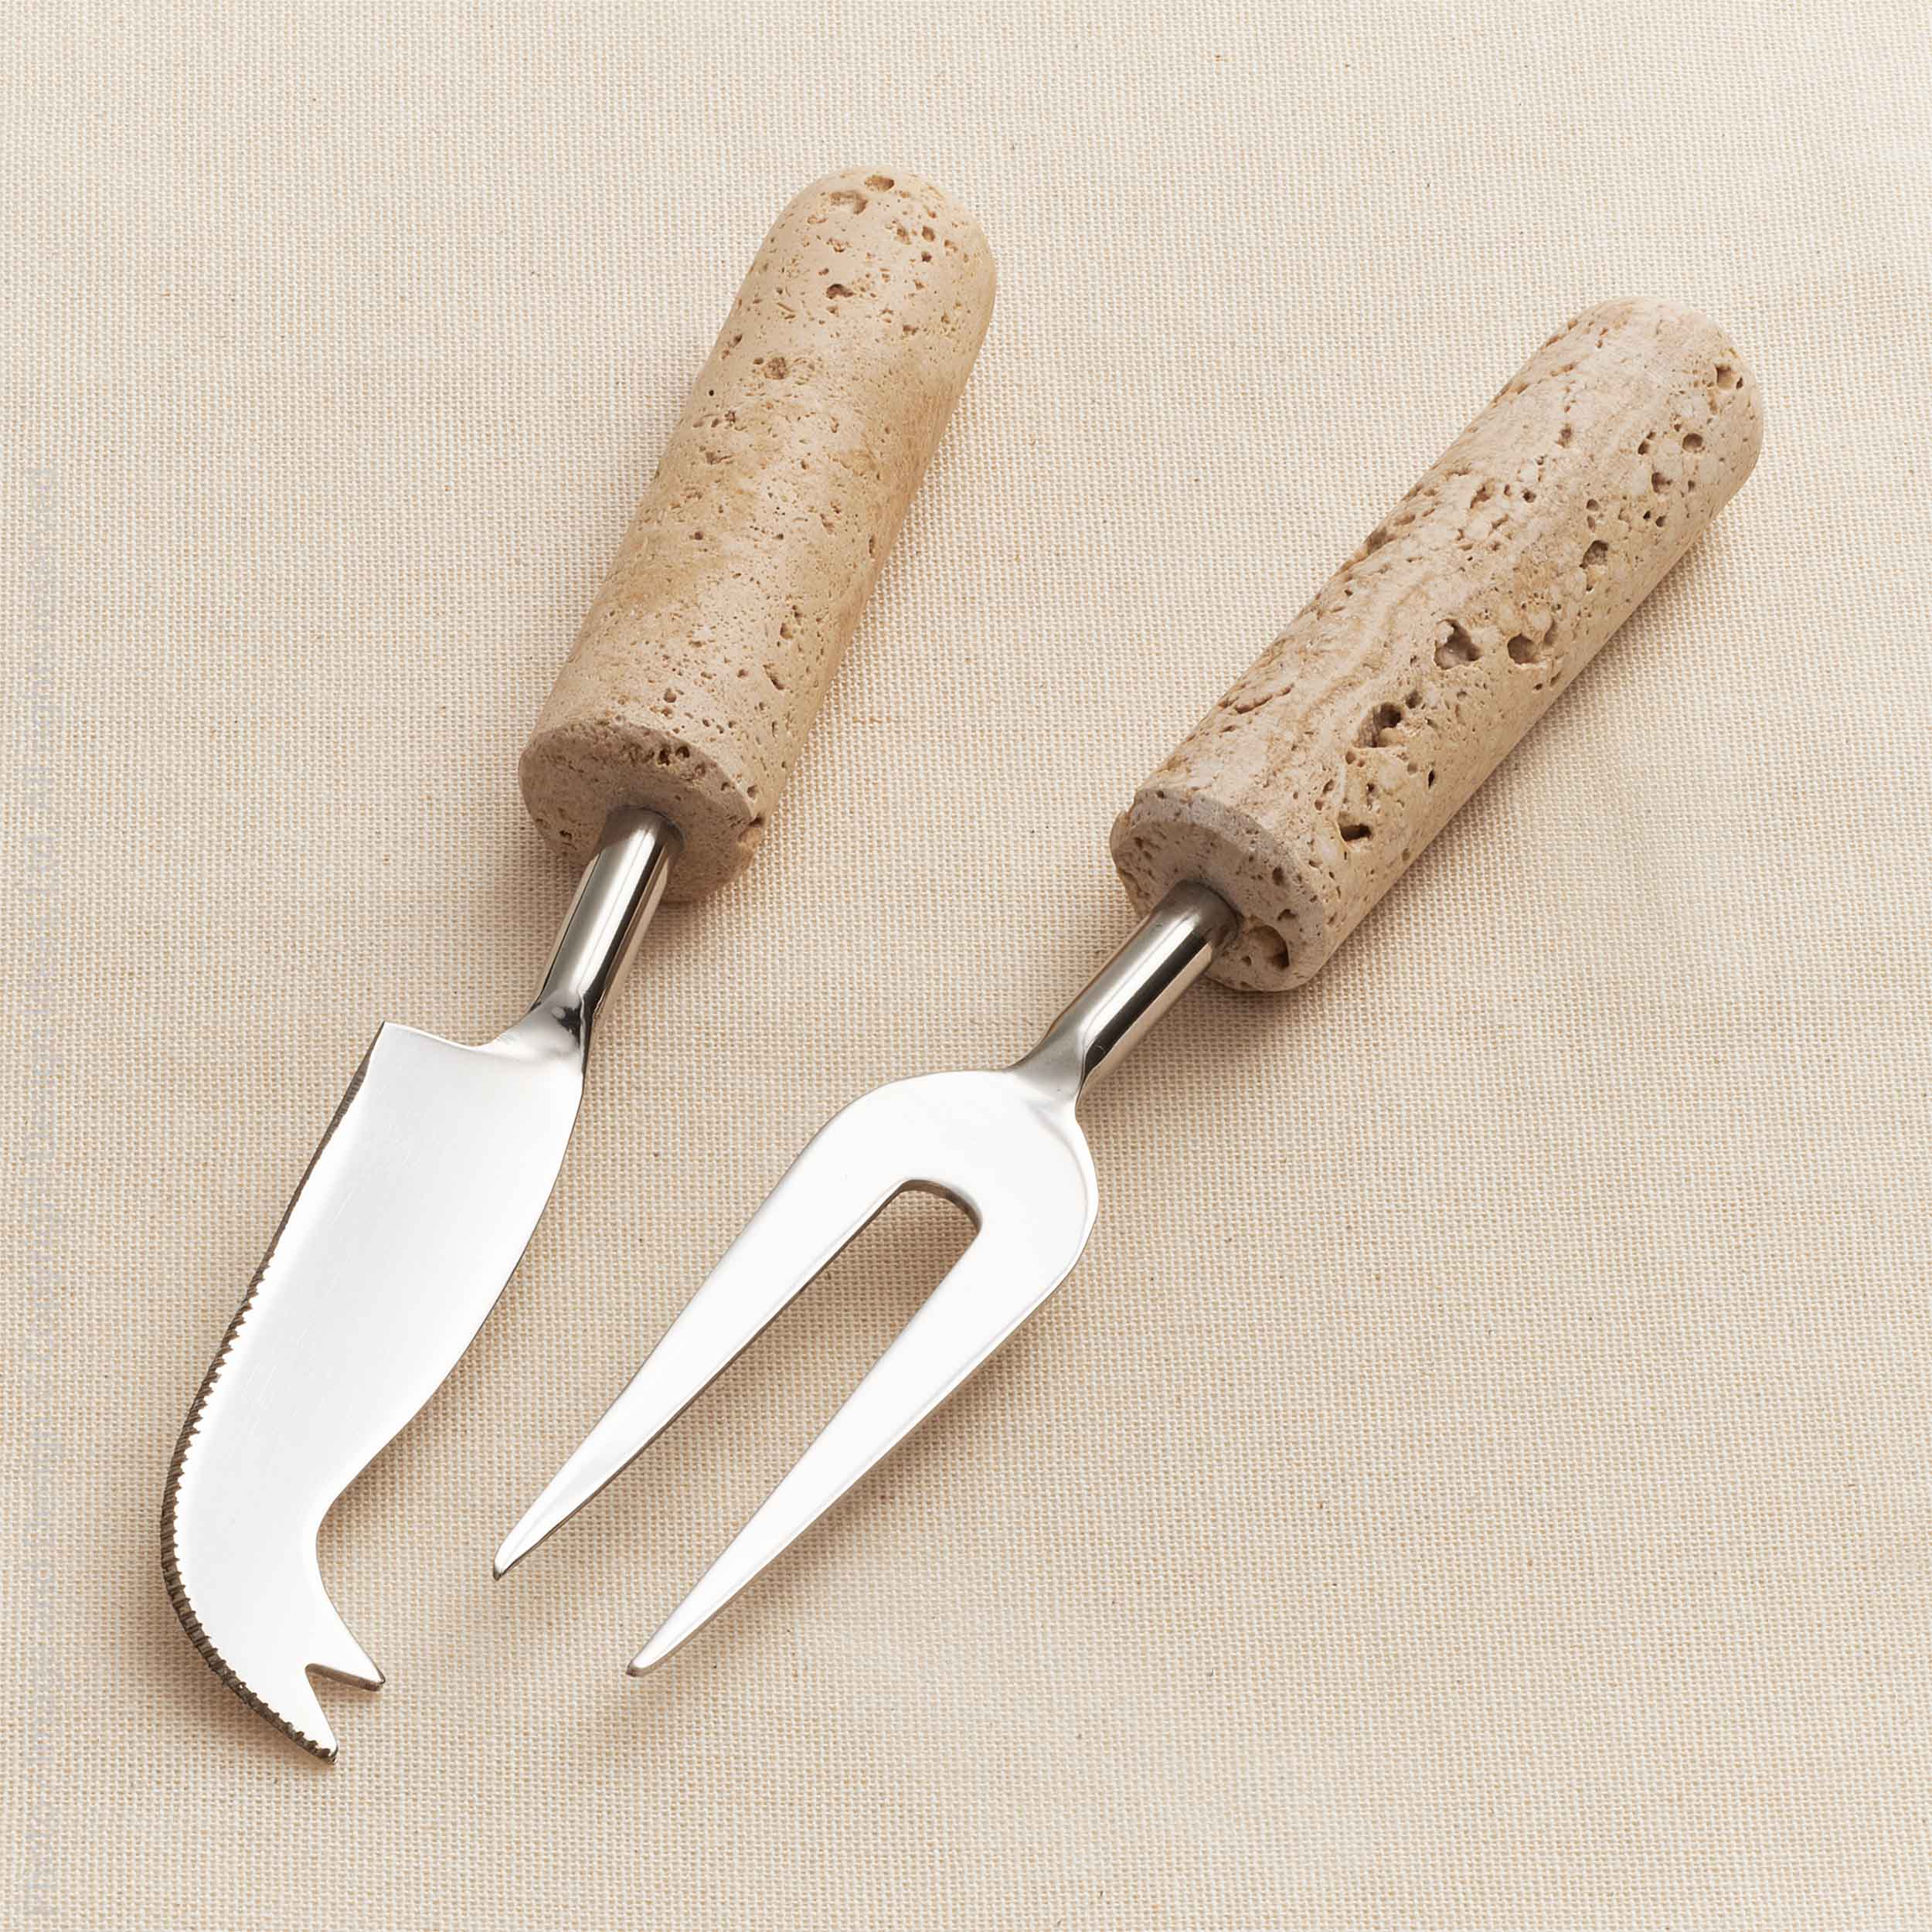 Marbella™ Hand Crafted Metal and Travertine Cheese Knives (set of 2) - (colors: Natural) | Premium Utensils from the Marbella™ collection | made with Metal and Travertine for long lasting use